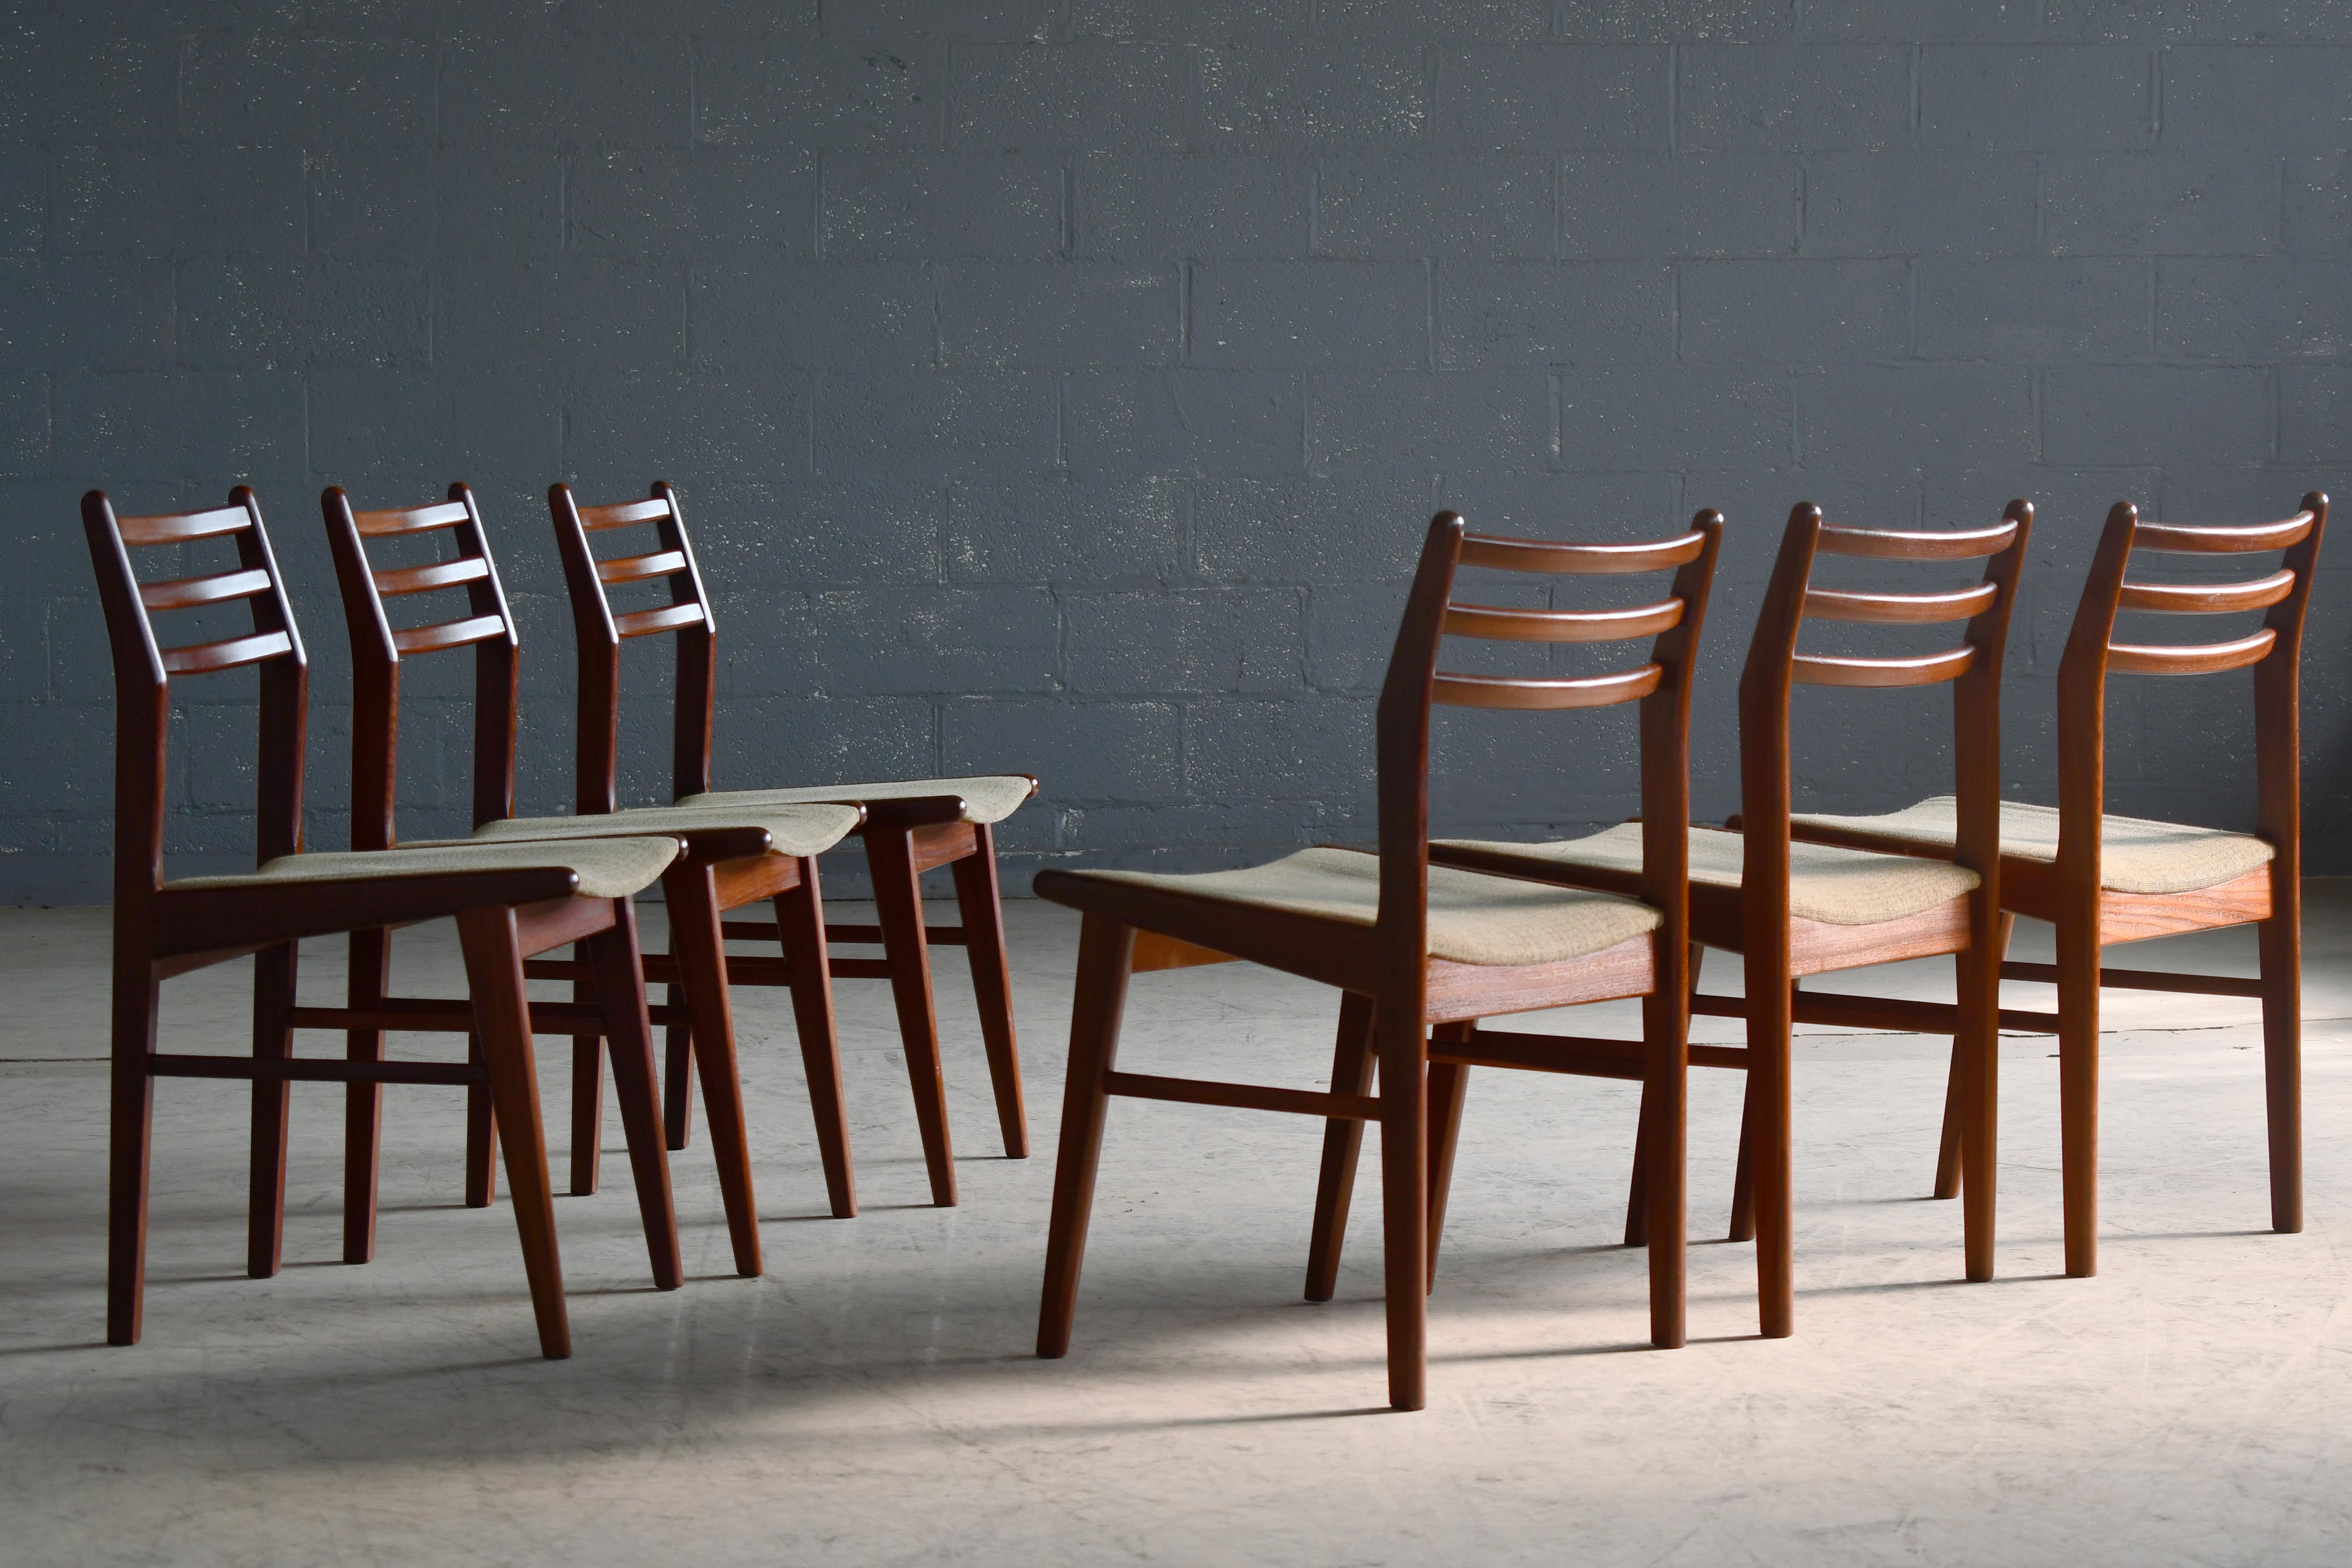 Superb set of six dining chairs designed in the 1960's by Mogens Hansen and made on his own factory. Made from Dark solid teak with a nice deep color and great grain. Many very cool design details making the chairs a little 